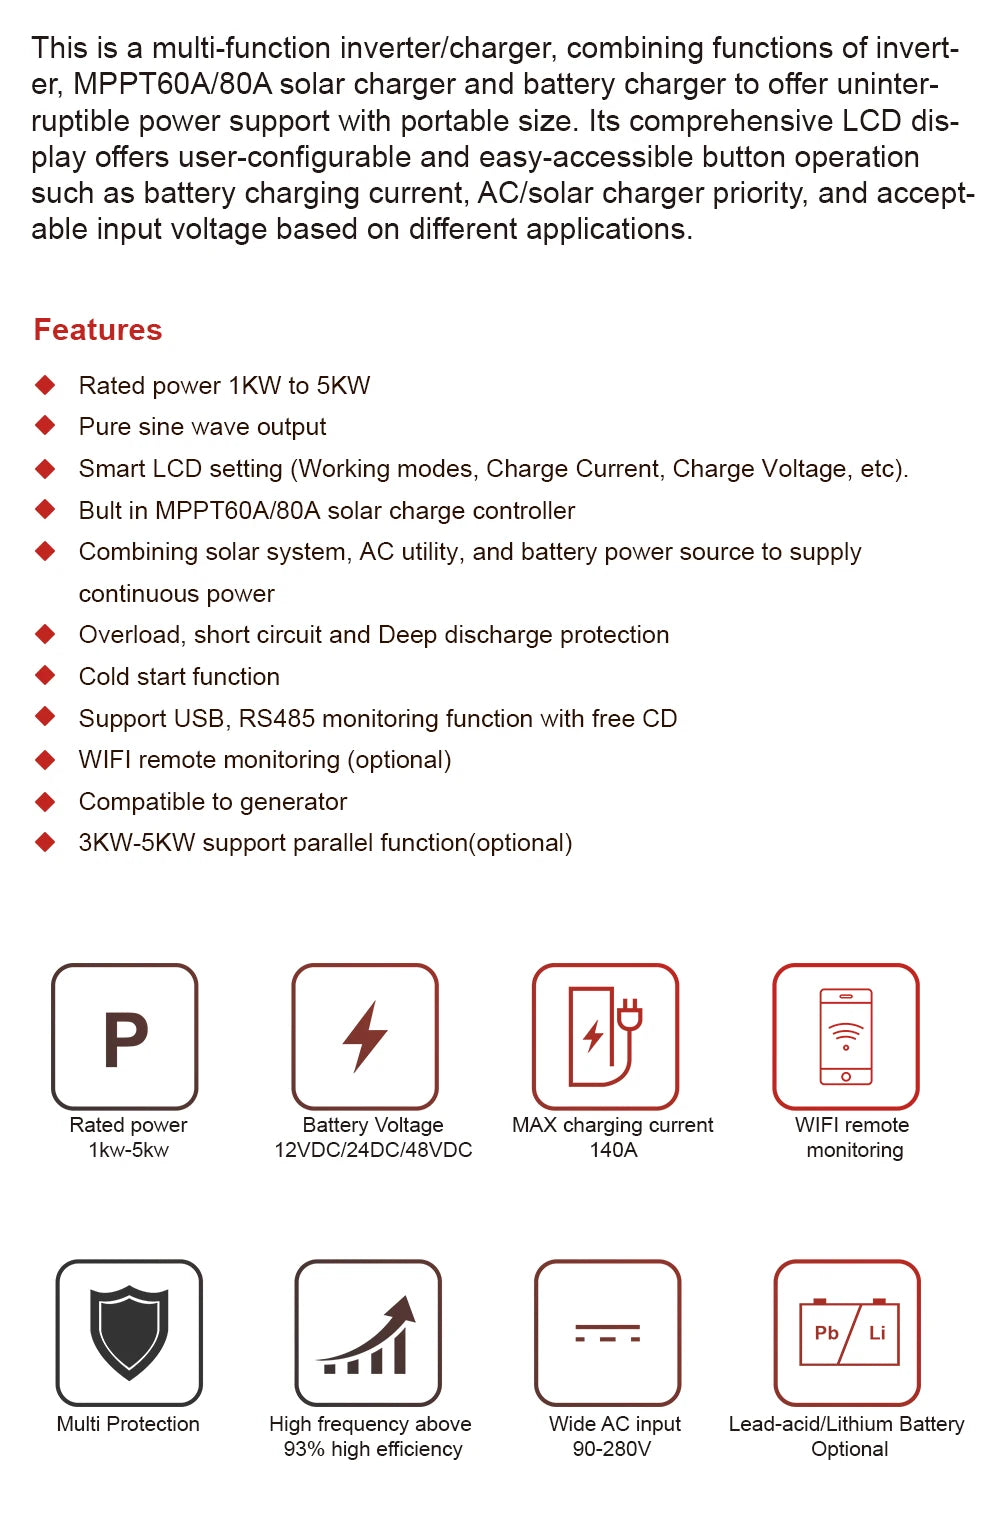 Hybrid off-grid solar inverter with built-in charge controller and WiFi connectivity.